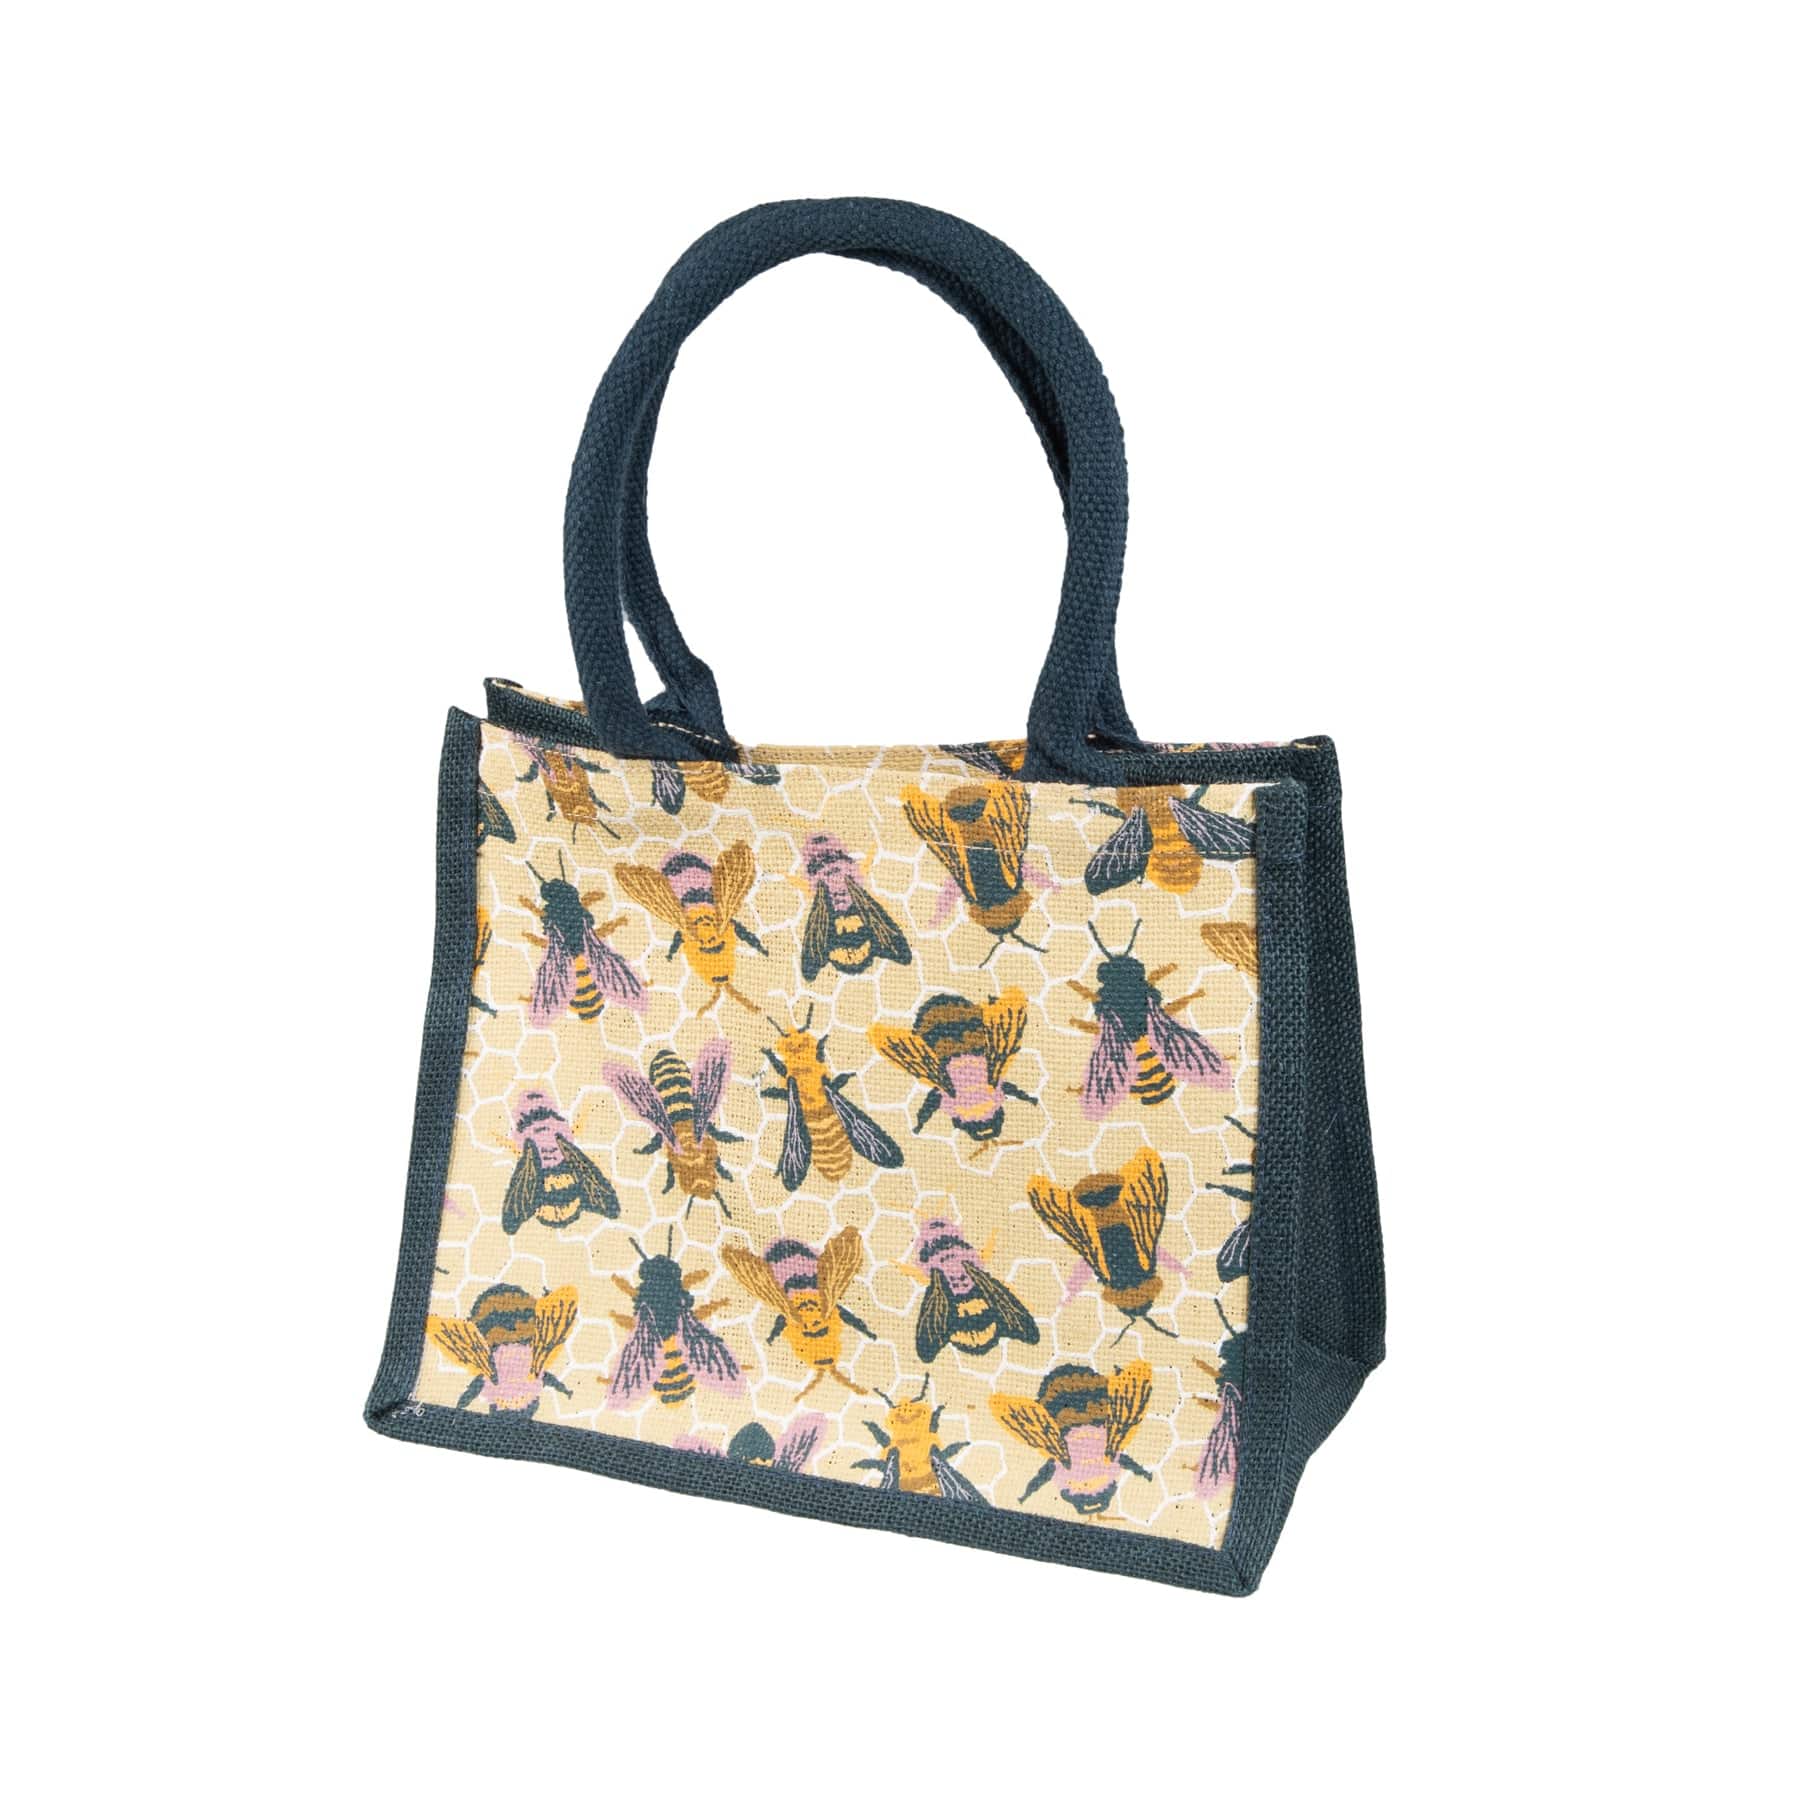 Designer tote bag with bee and honeycomb pattern, navy blue handles, fashionable summer accessory, isolated on white background.